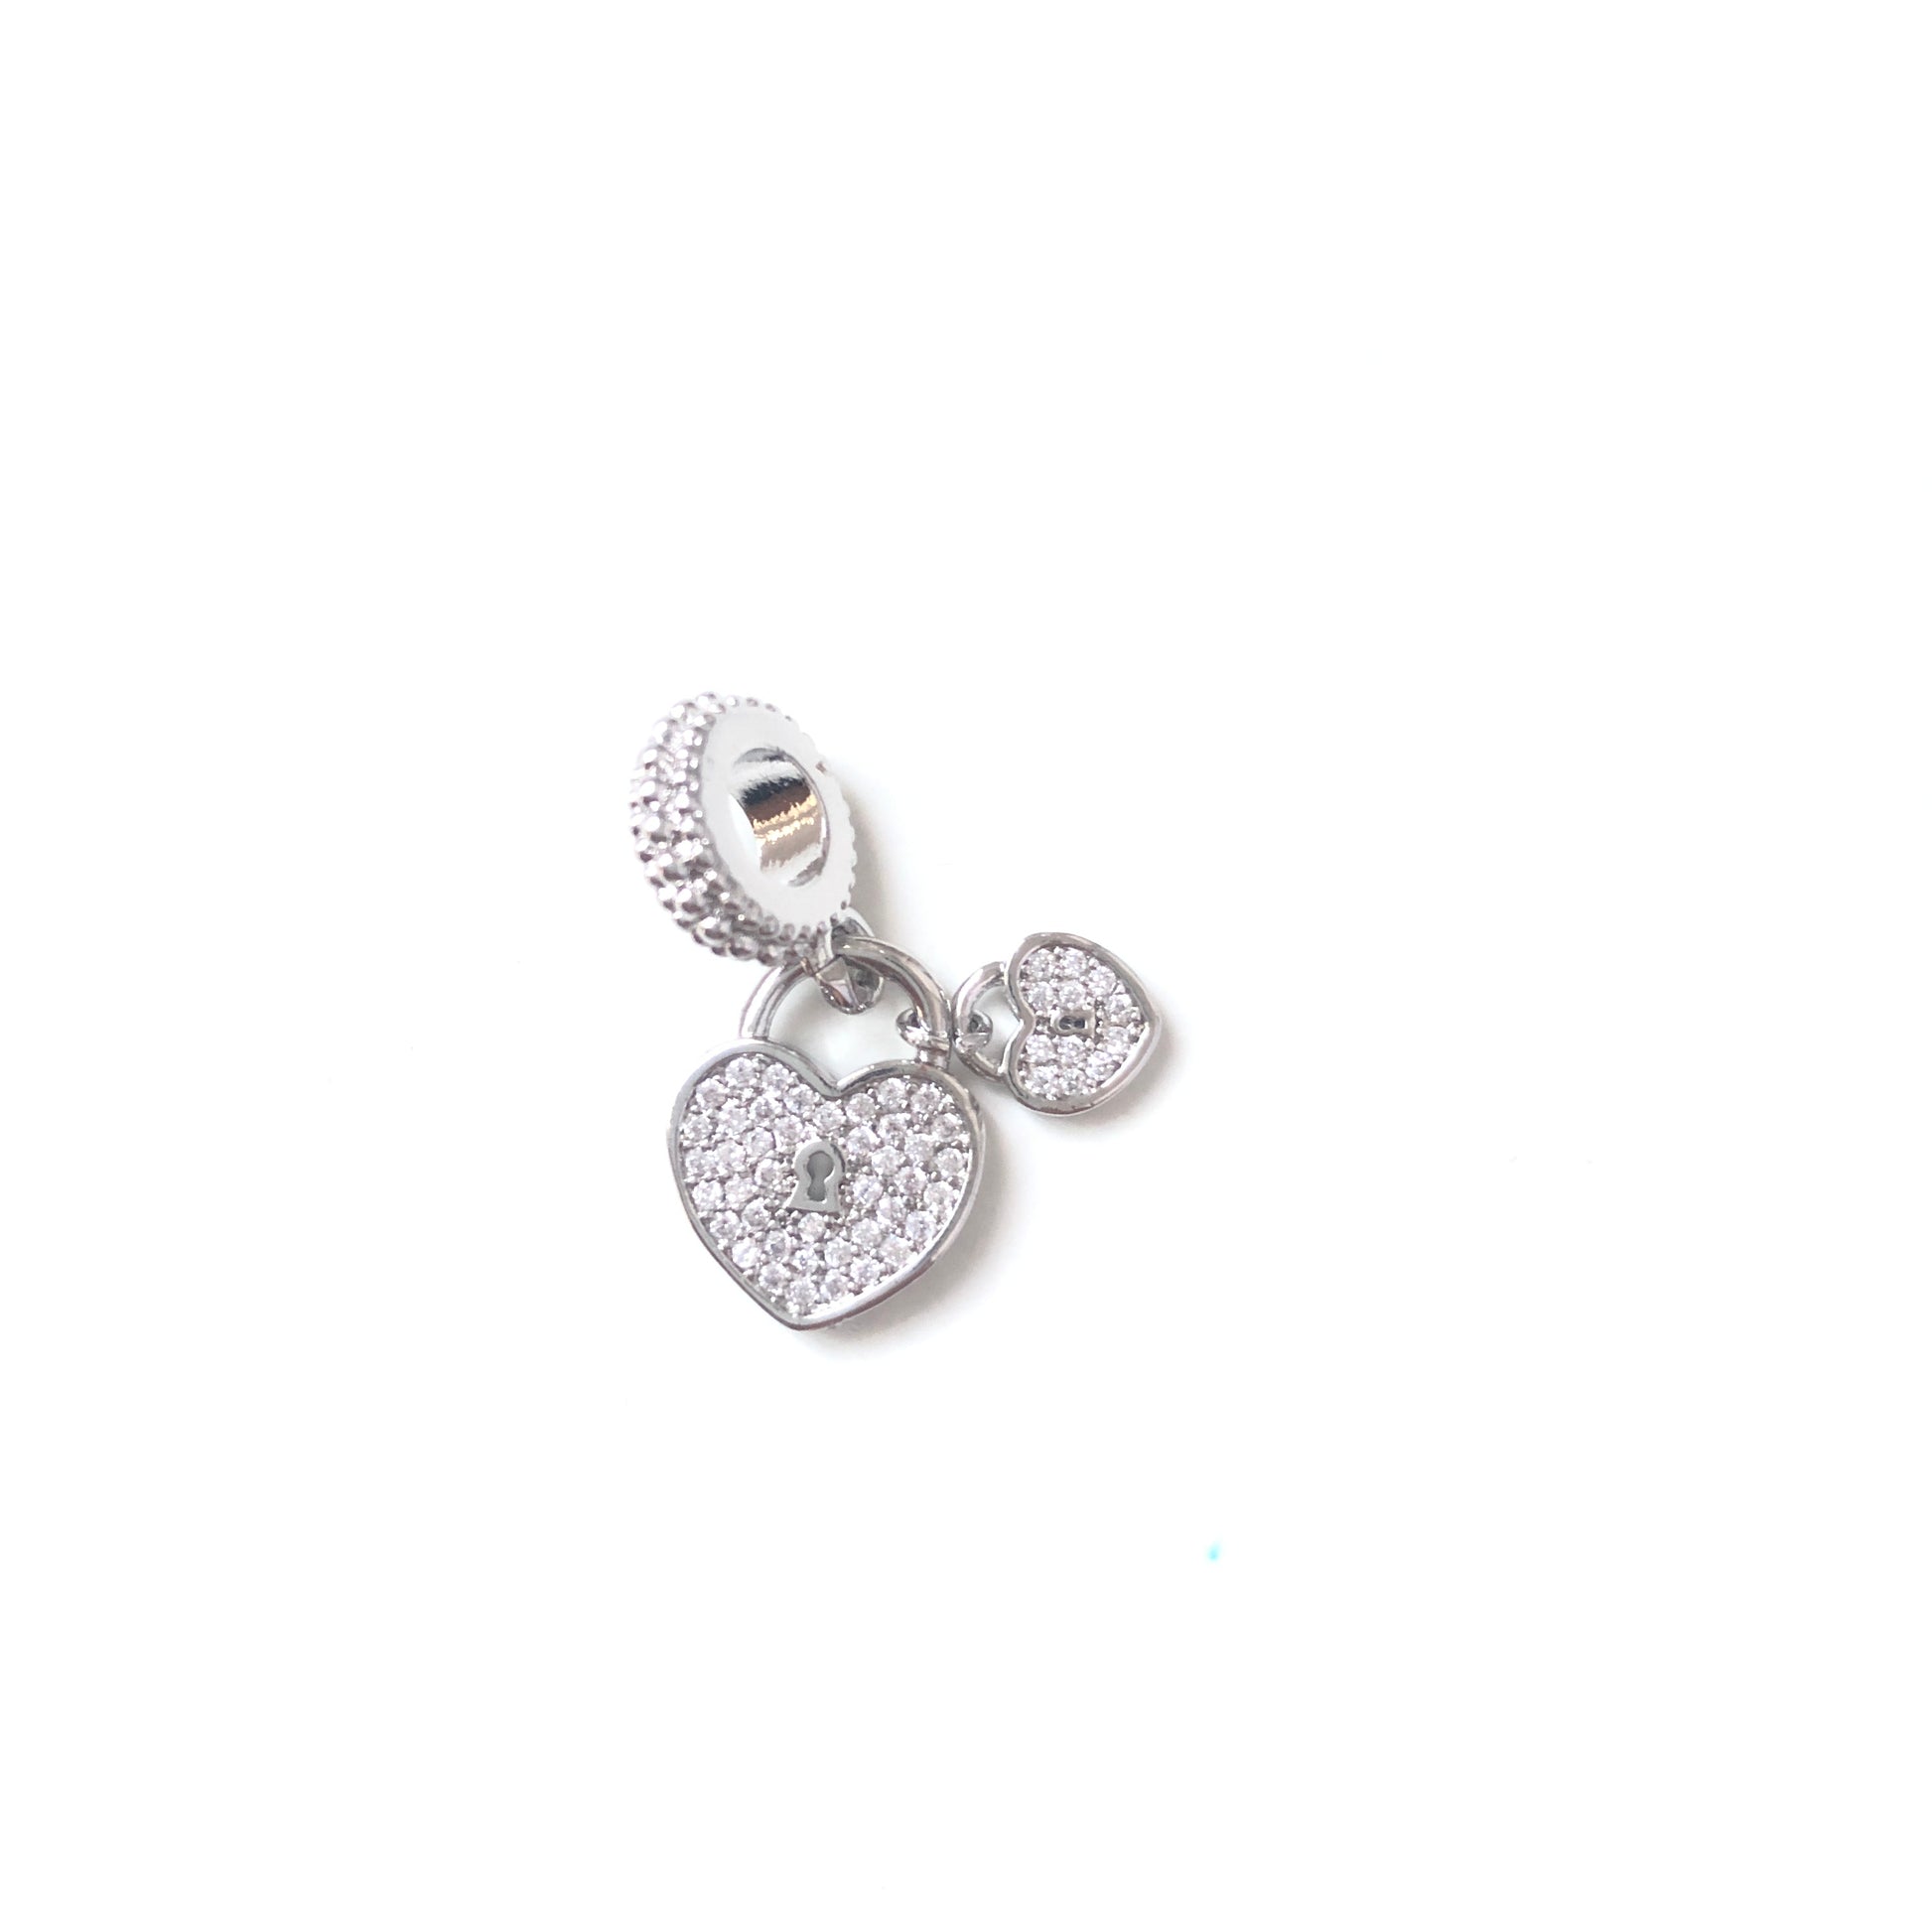 10pcs/lot 23*11mm CZ Paved Double Heart Lock Charms Silver CZ Paved Charms Hearts Charms Beads Beyond